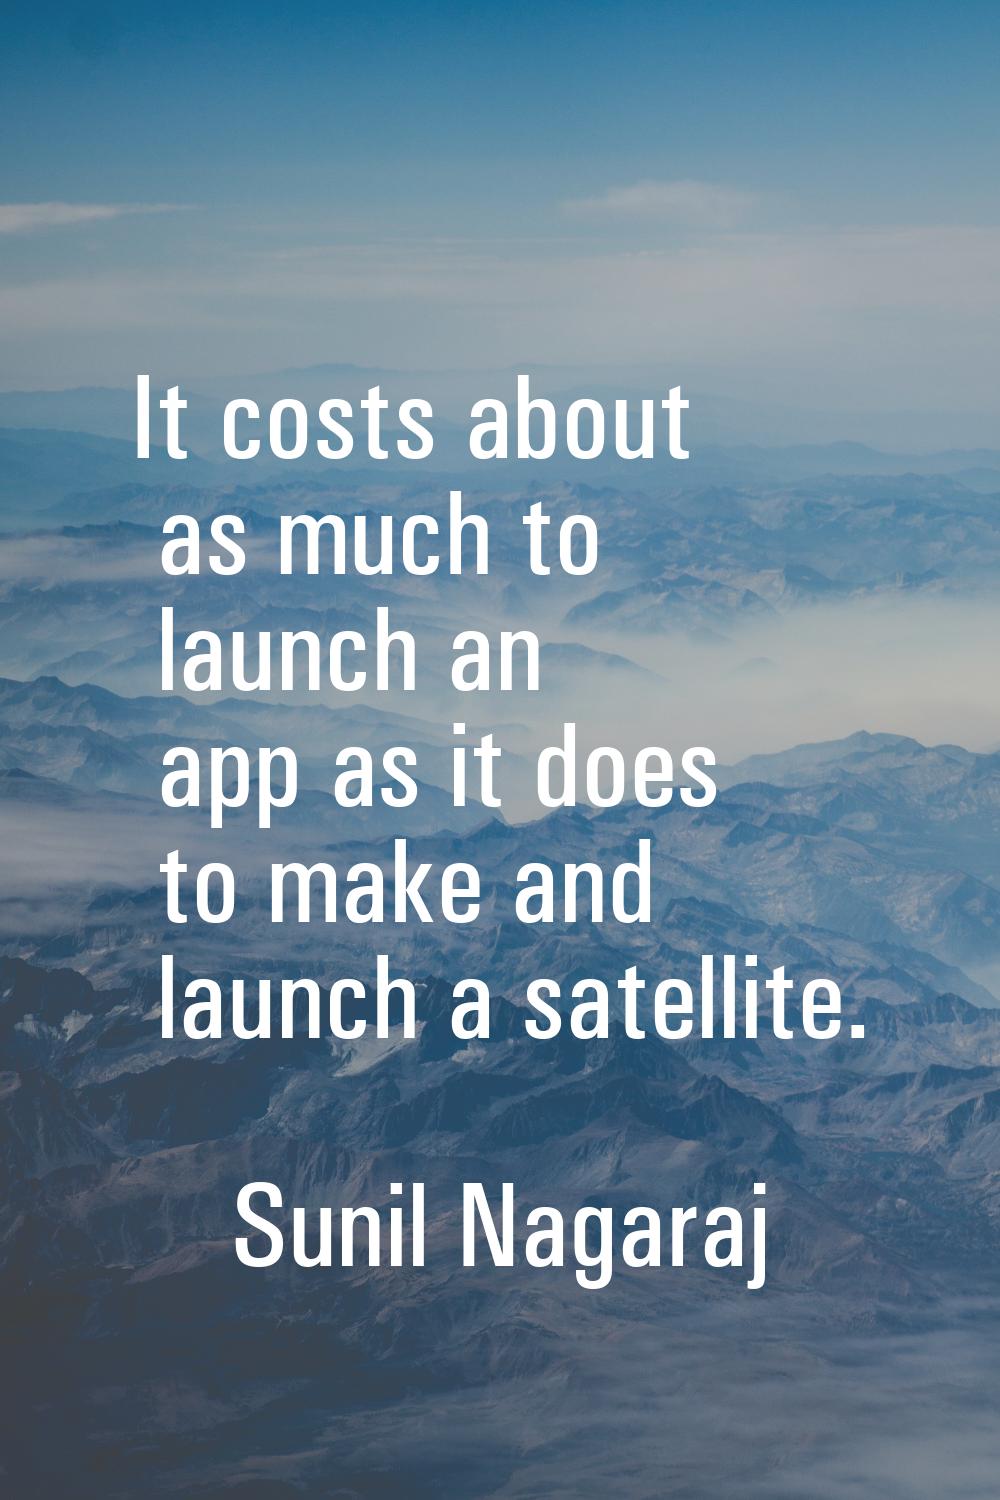 It costs about as much to launch an app as it does to make and launch a satellite.